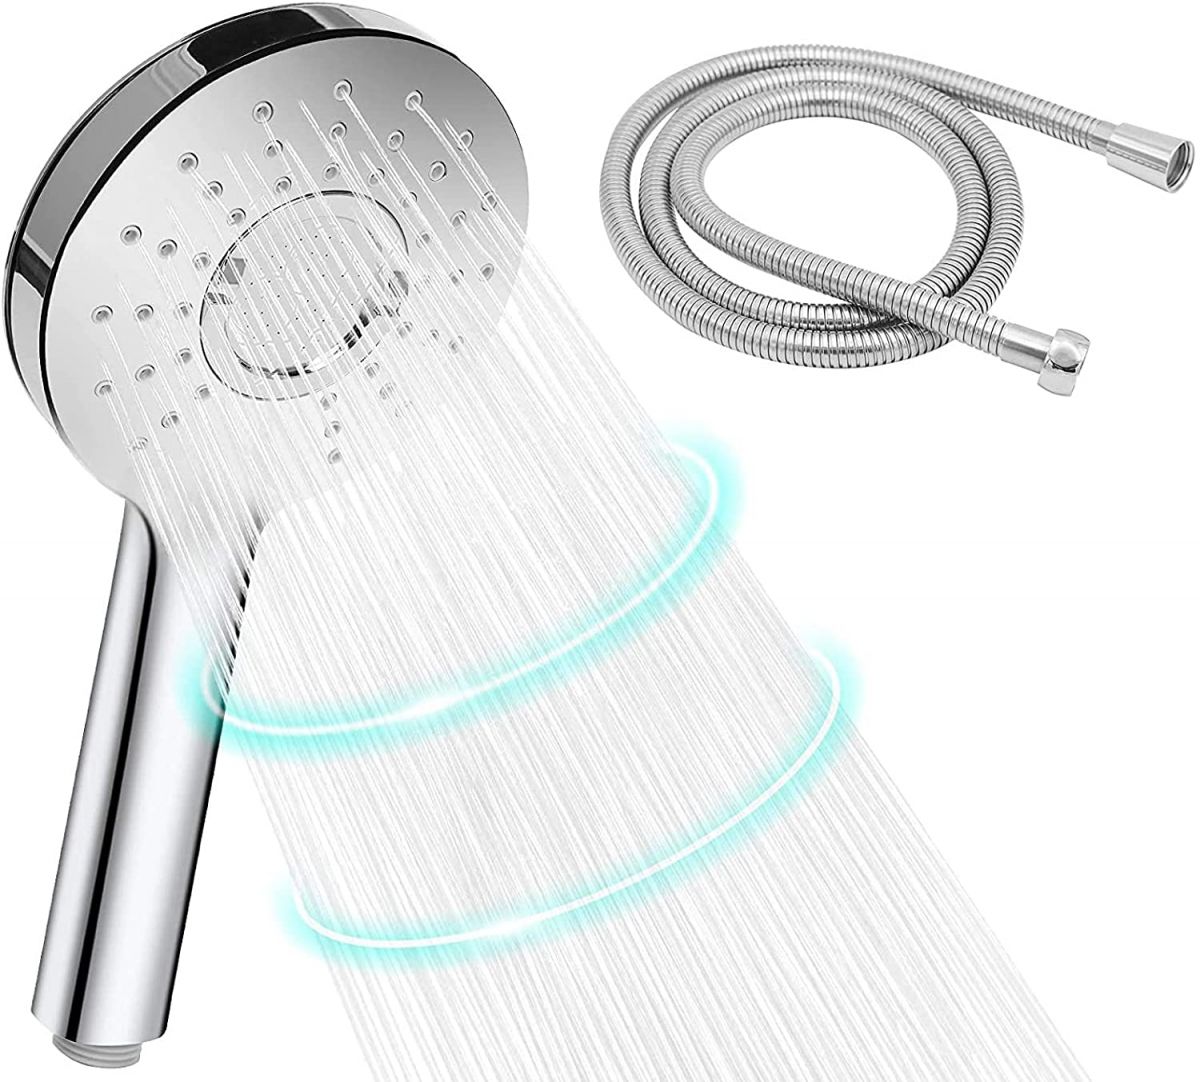 Shower head with 1.5 m hose, 3 jet types.